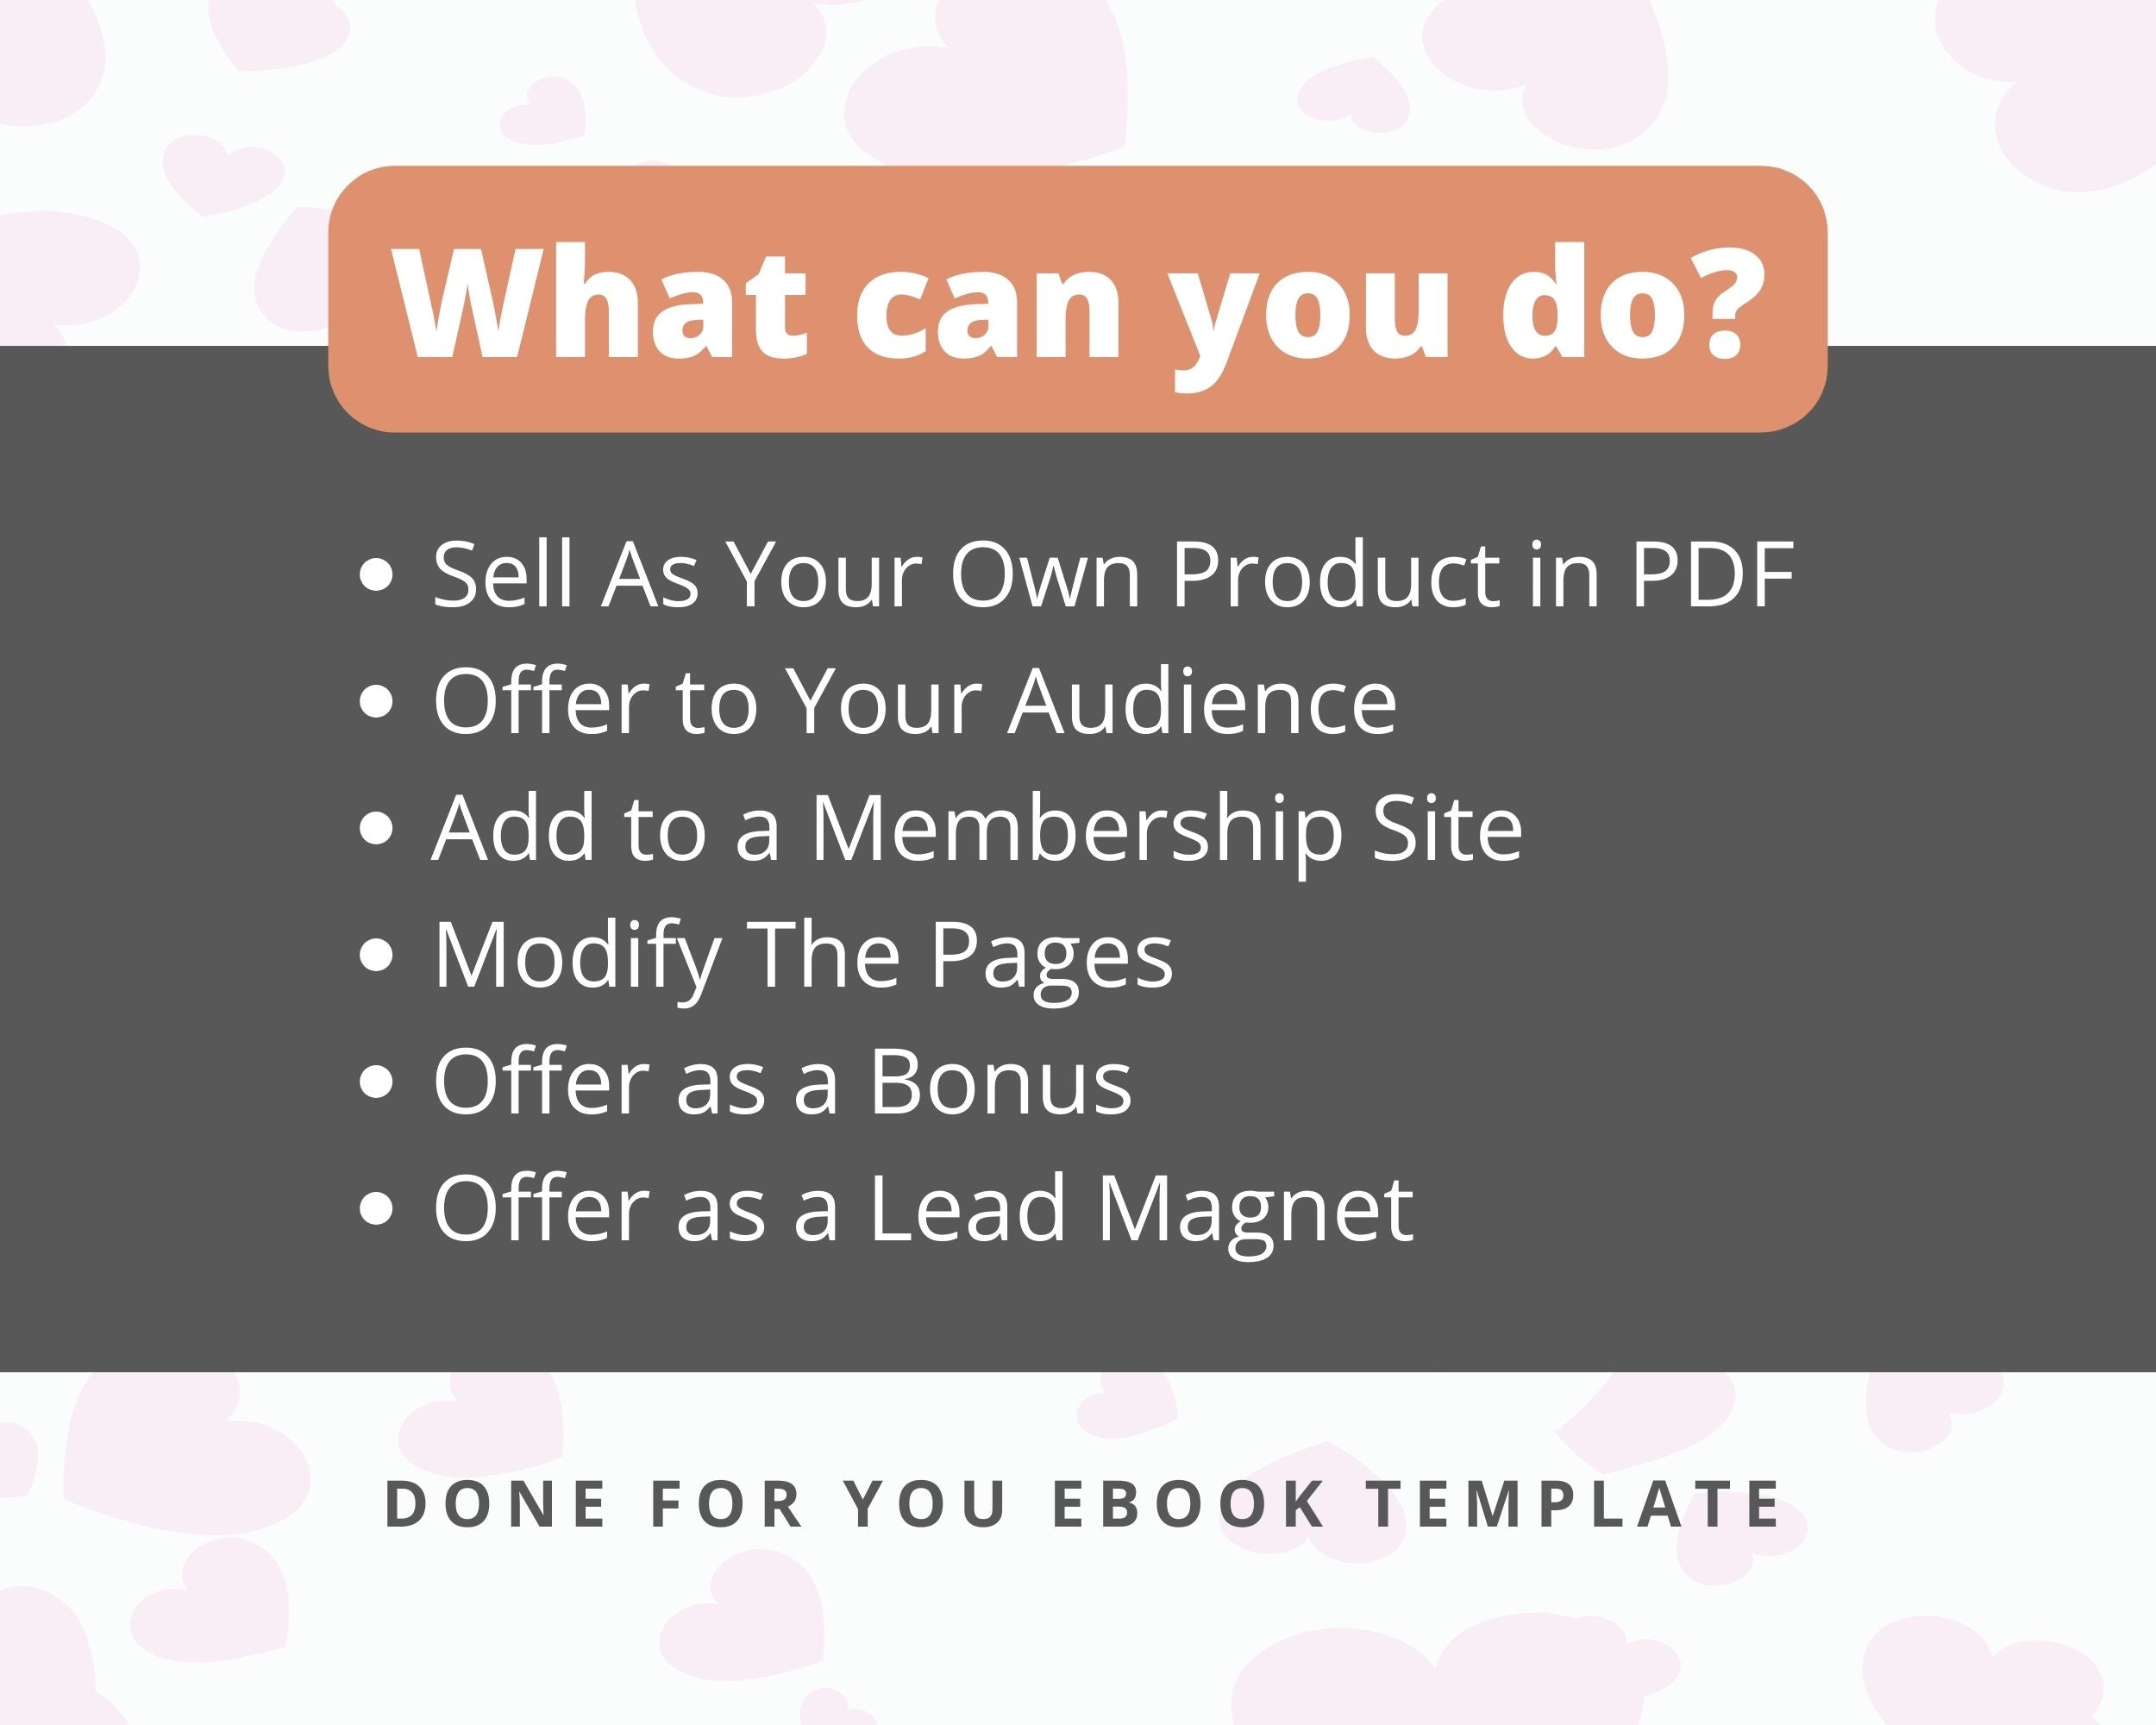 Editable Perfect First Date Ebook | Done-for-You Ebook in Canva | Rebrandable and Resizable Canva Template